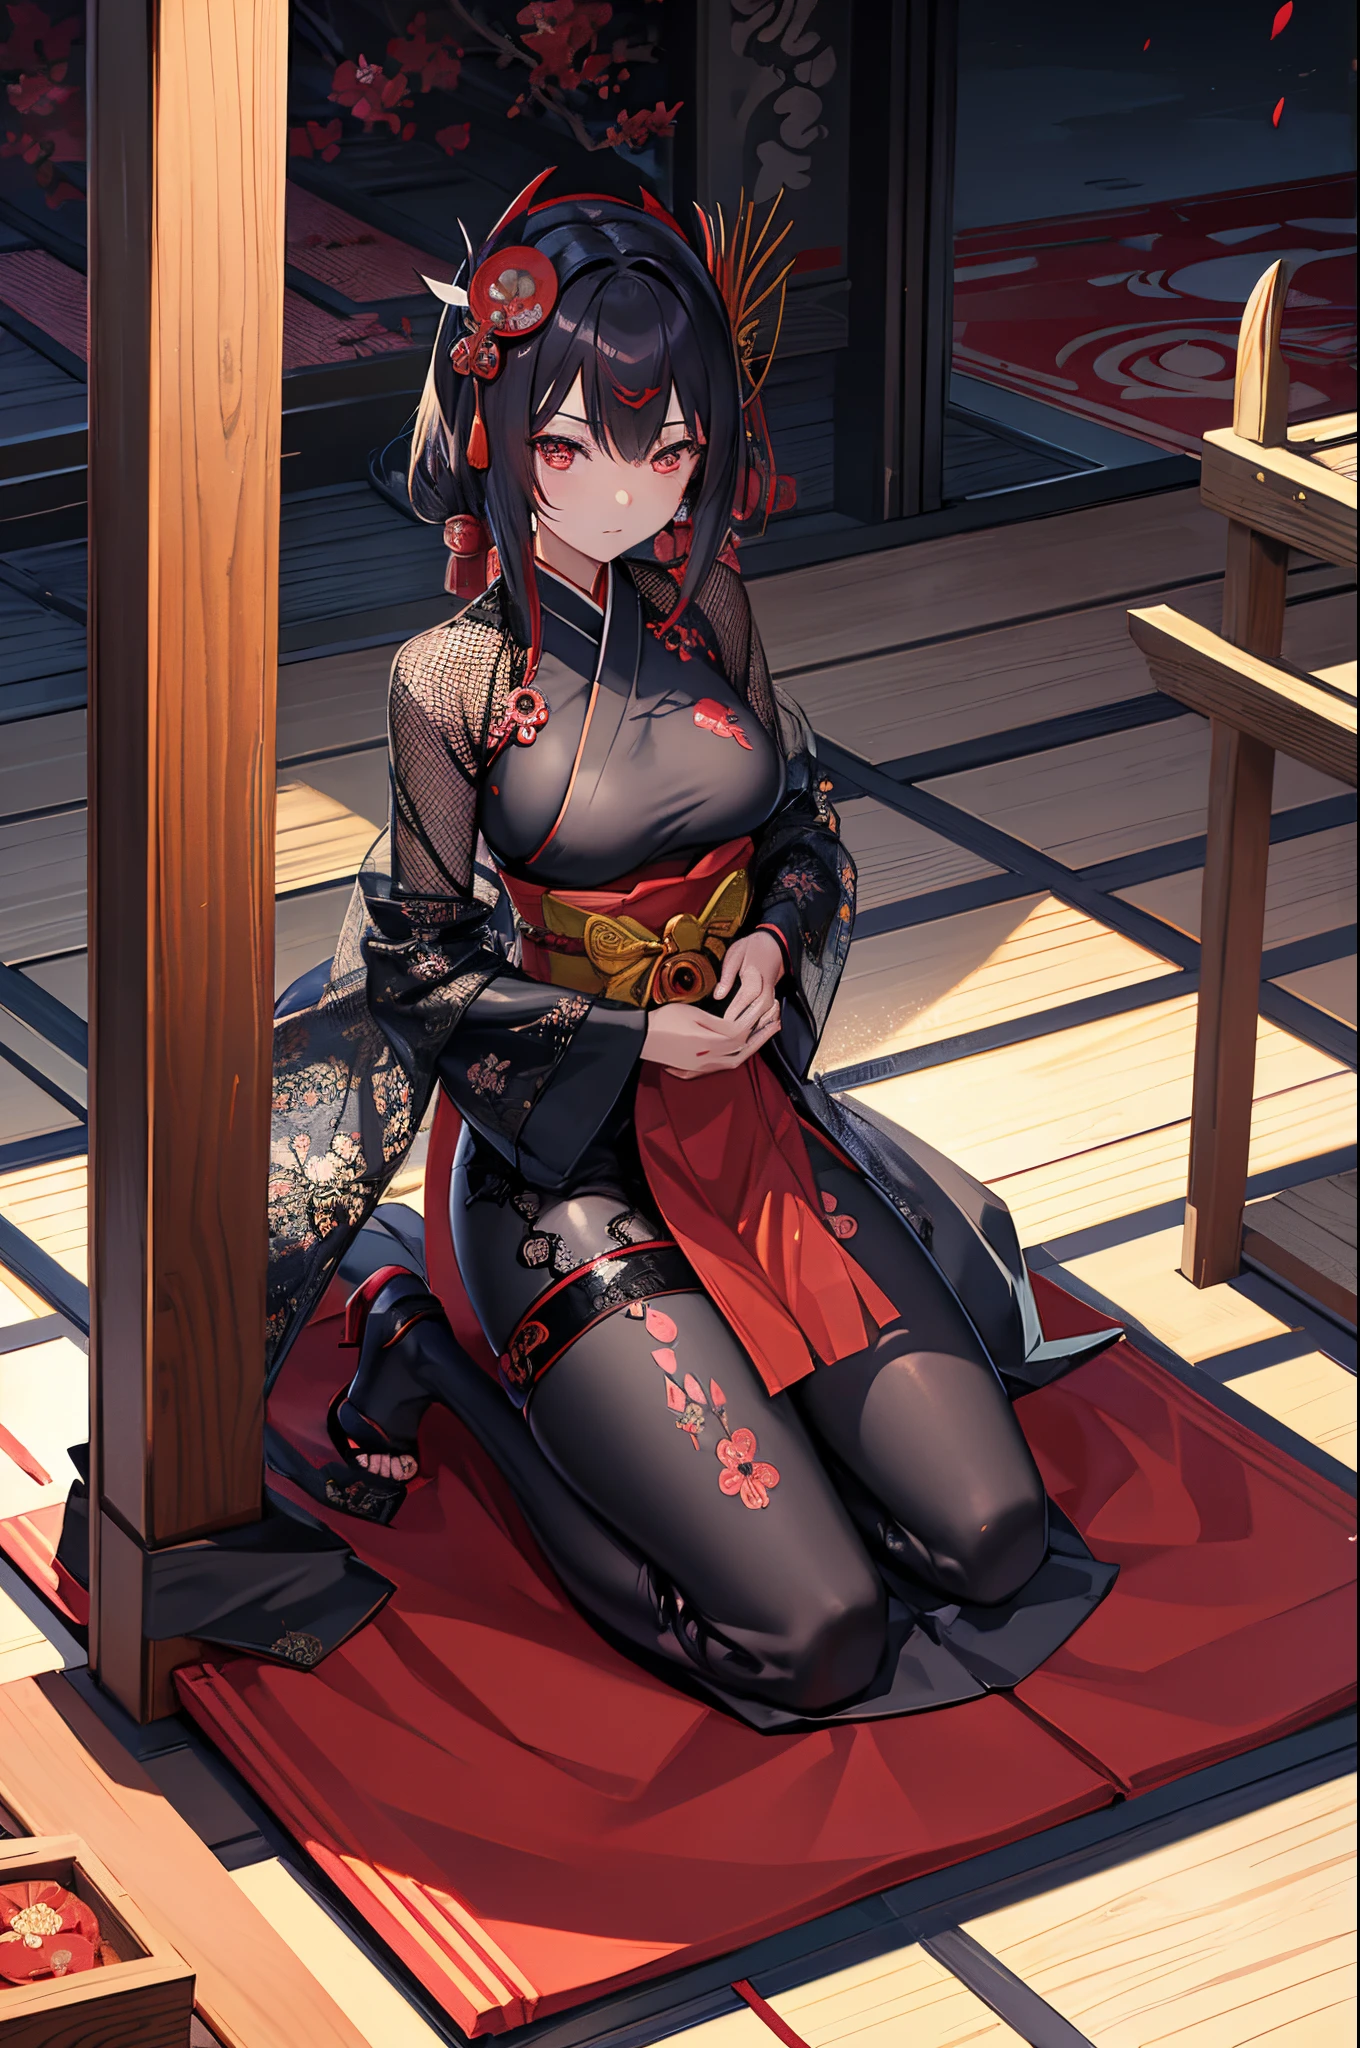 Anime style, 1 girl, Oiran style hair, Shinobu, ninja.
Semi-transparent, Ninja Suit, mesh, lace, Ninja mask.
Sexually alluring, sexy pose.
extremely long katana, sword, blade.
Blood on body, blood on face, wounded.
Kneeling, submissive, obedient.
Background is a Japanese style garden.